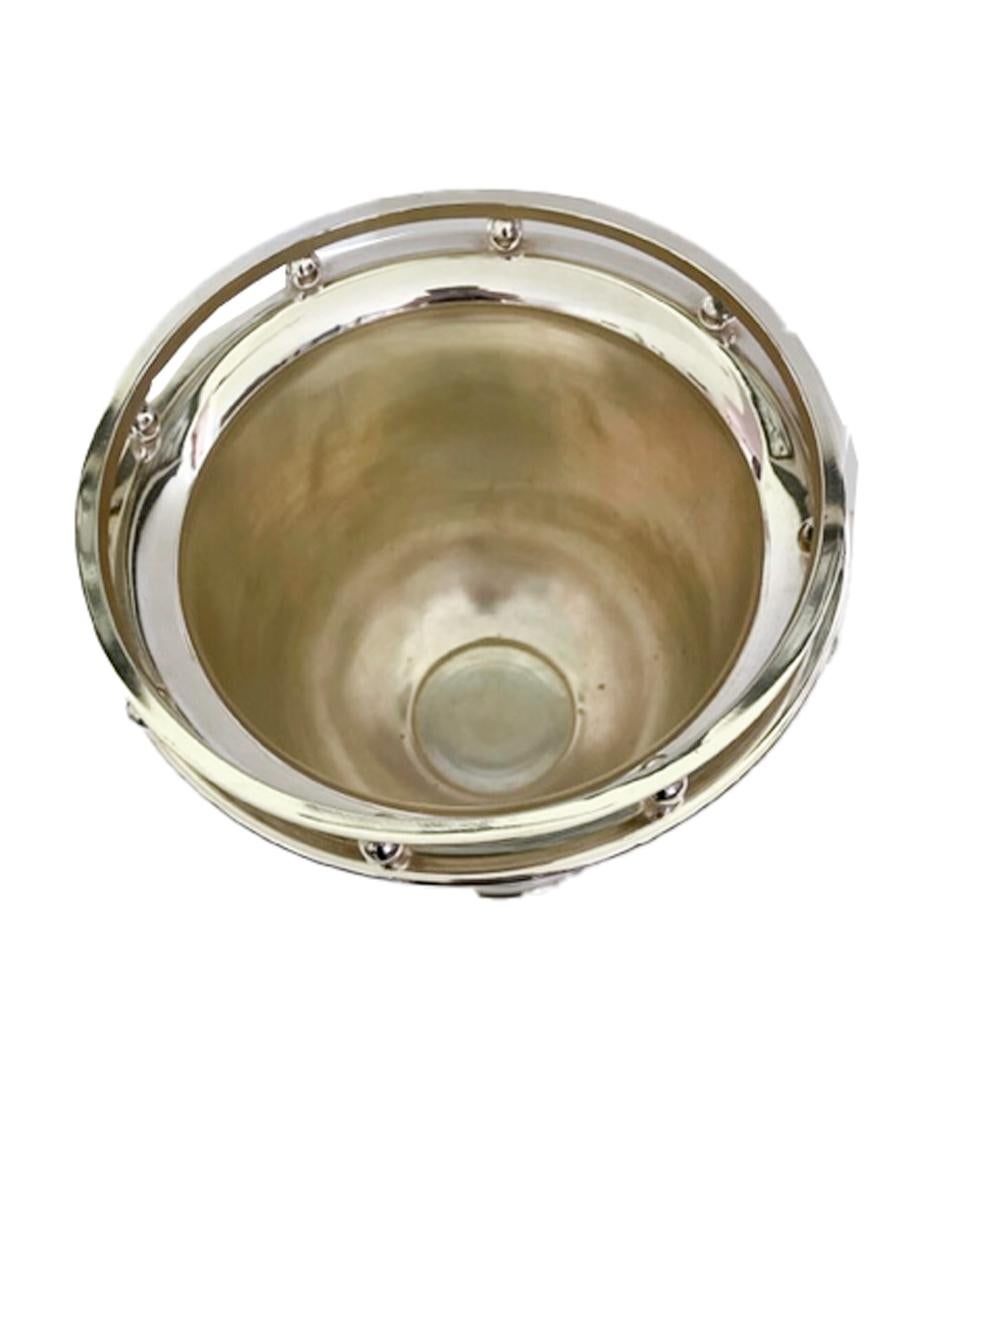 Midcentury Silver Plate Pedestaled Wine / Champagne Bucket W/Galleried Rim For Sale 8